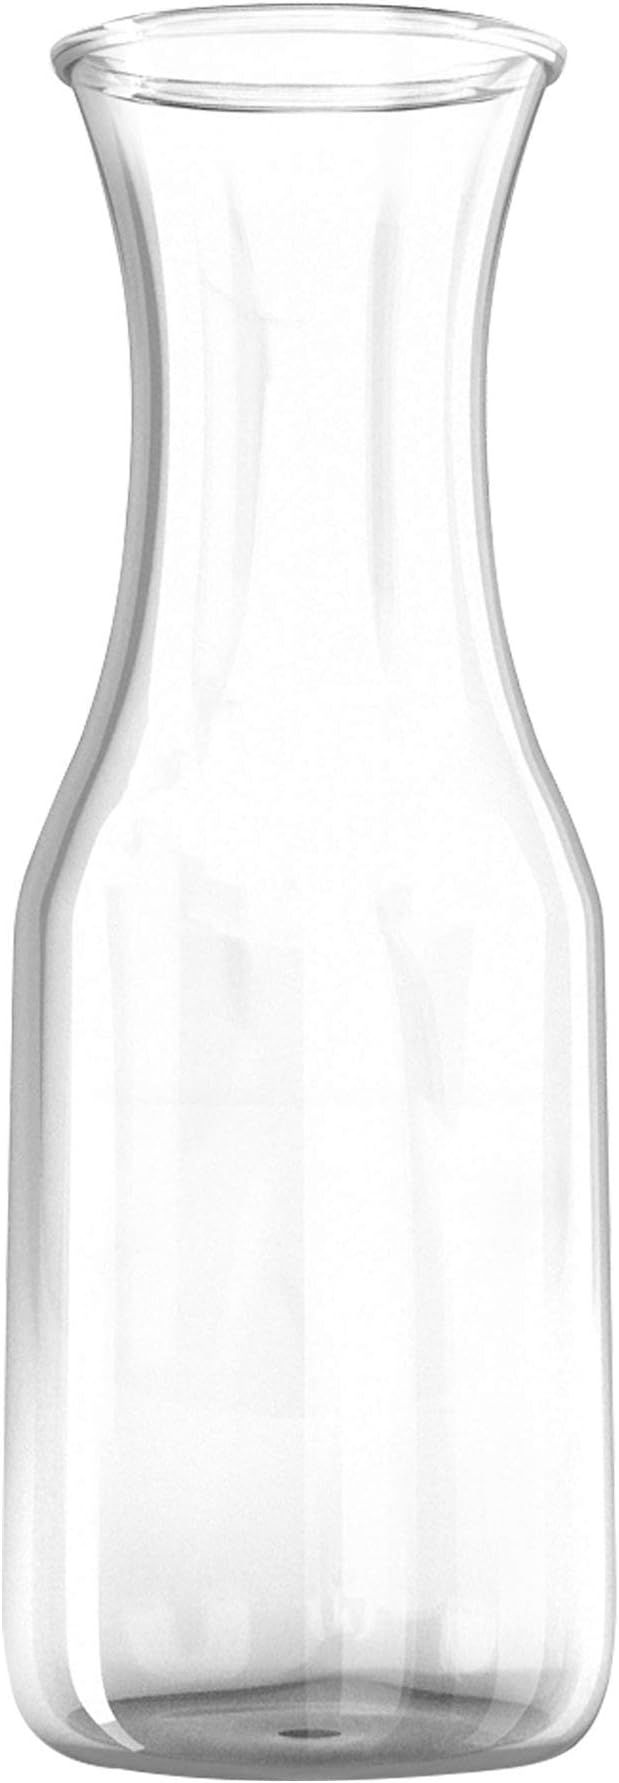 34 oz Glass Carafe - 1 Bottle - Drink Pitcher and Elegant Wine Decanter, Comfortable Grip with Na... | Amazon (US)